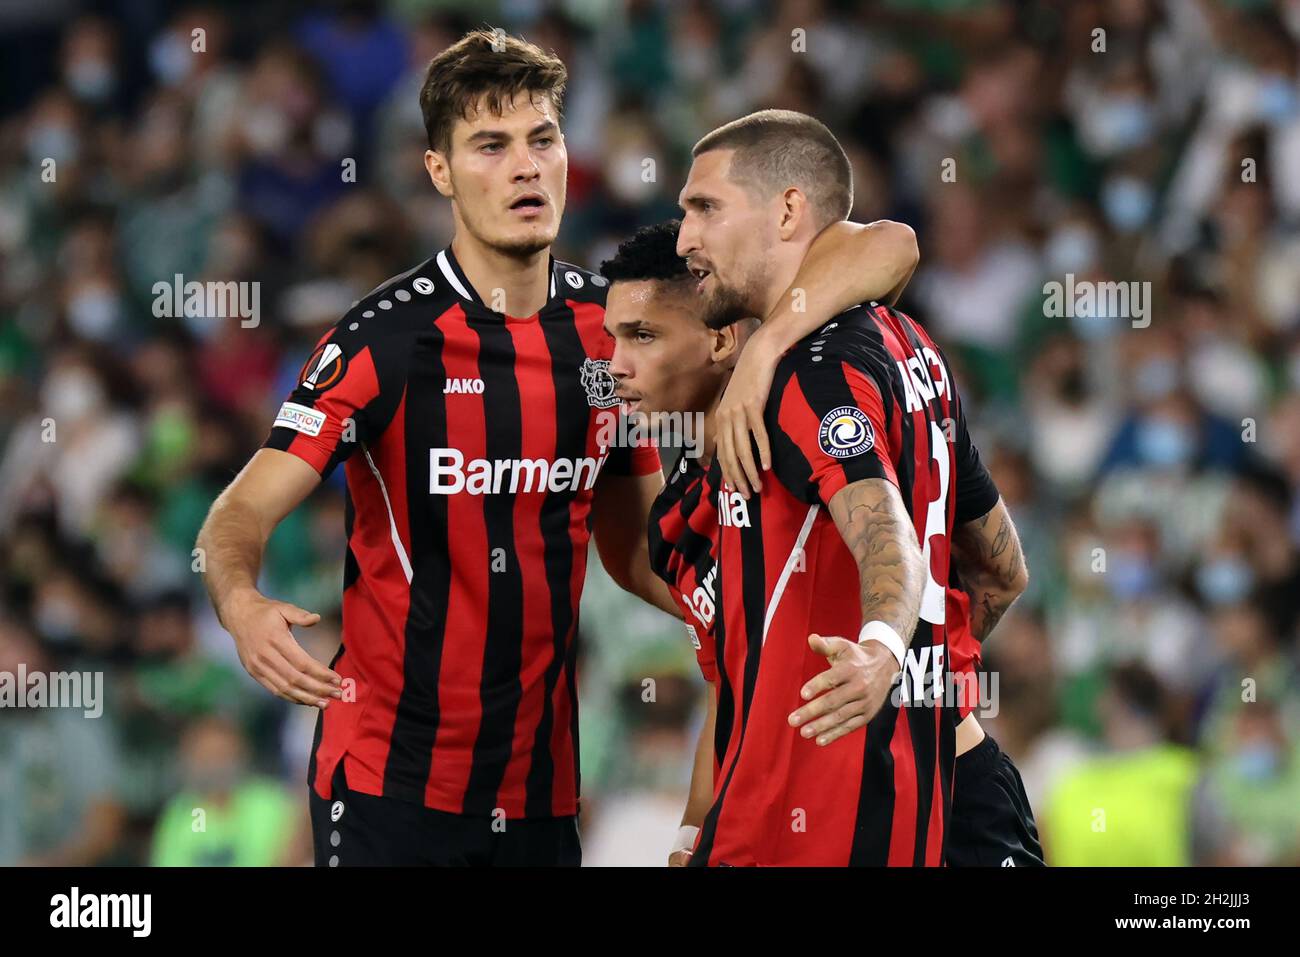 Seville, Spain. 21st Oct, 2021. Players of Bayer 04 Leverkusen celebrate a goal during the UEFA Europa League Group G stage match between Real Betis and Bayern Leverkusen at Benito Villamarin Stadium on October 21, 2021 in Seville, Spain. Credit: DAX Images/Alamy Live News Stock Photo